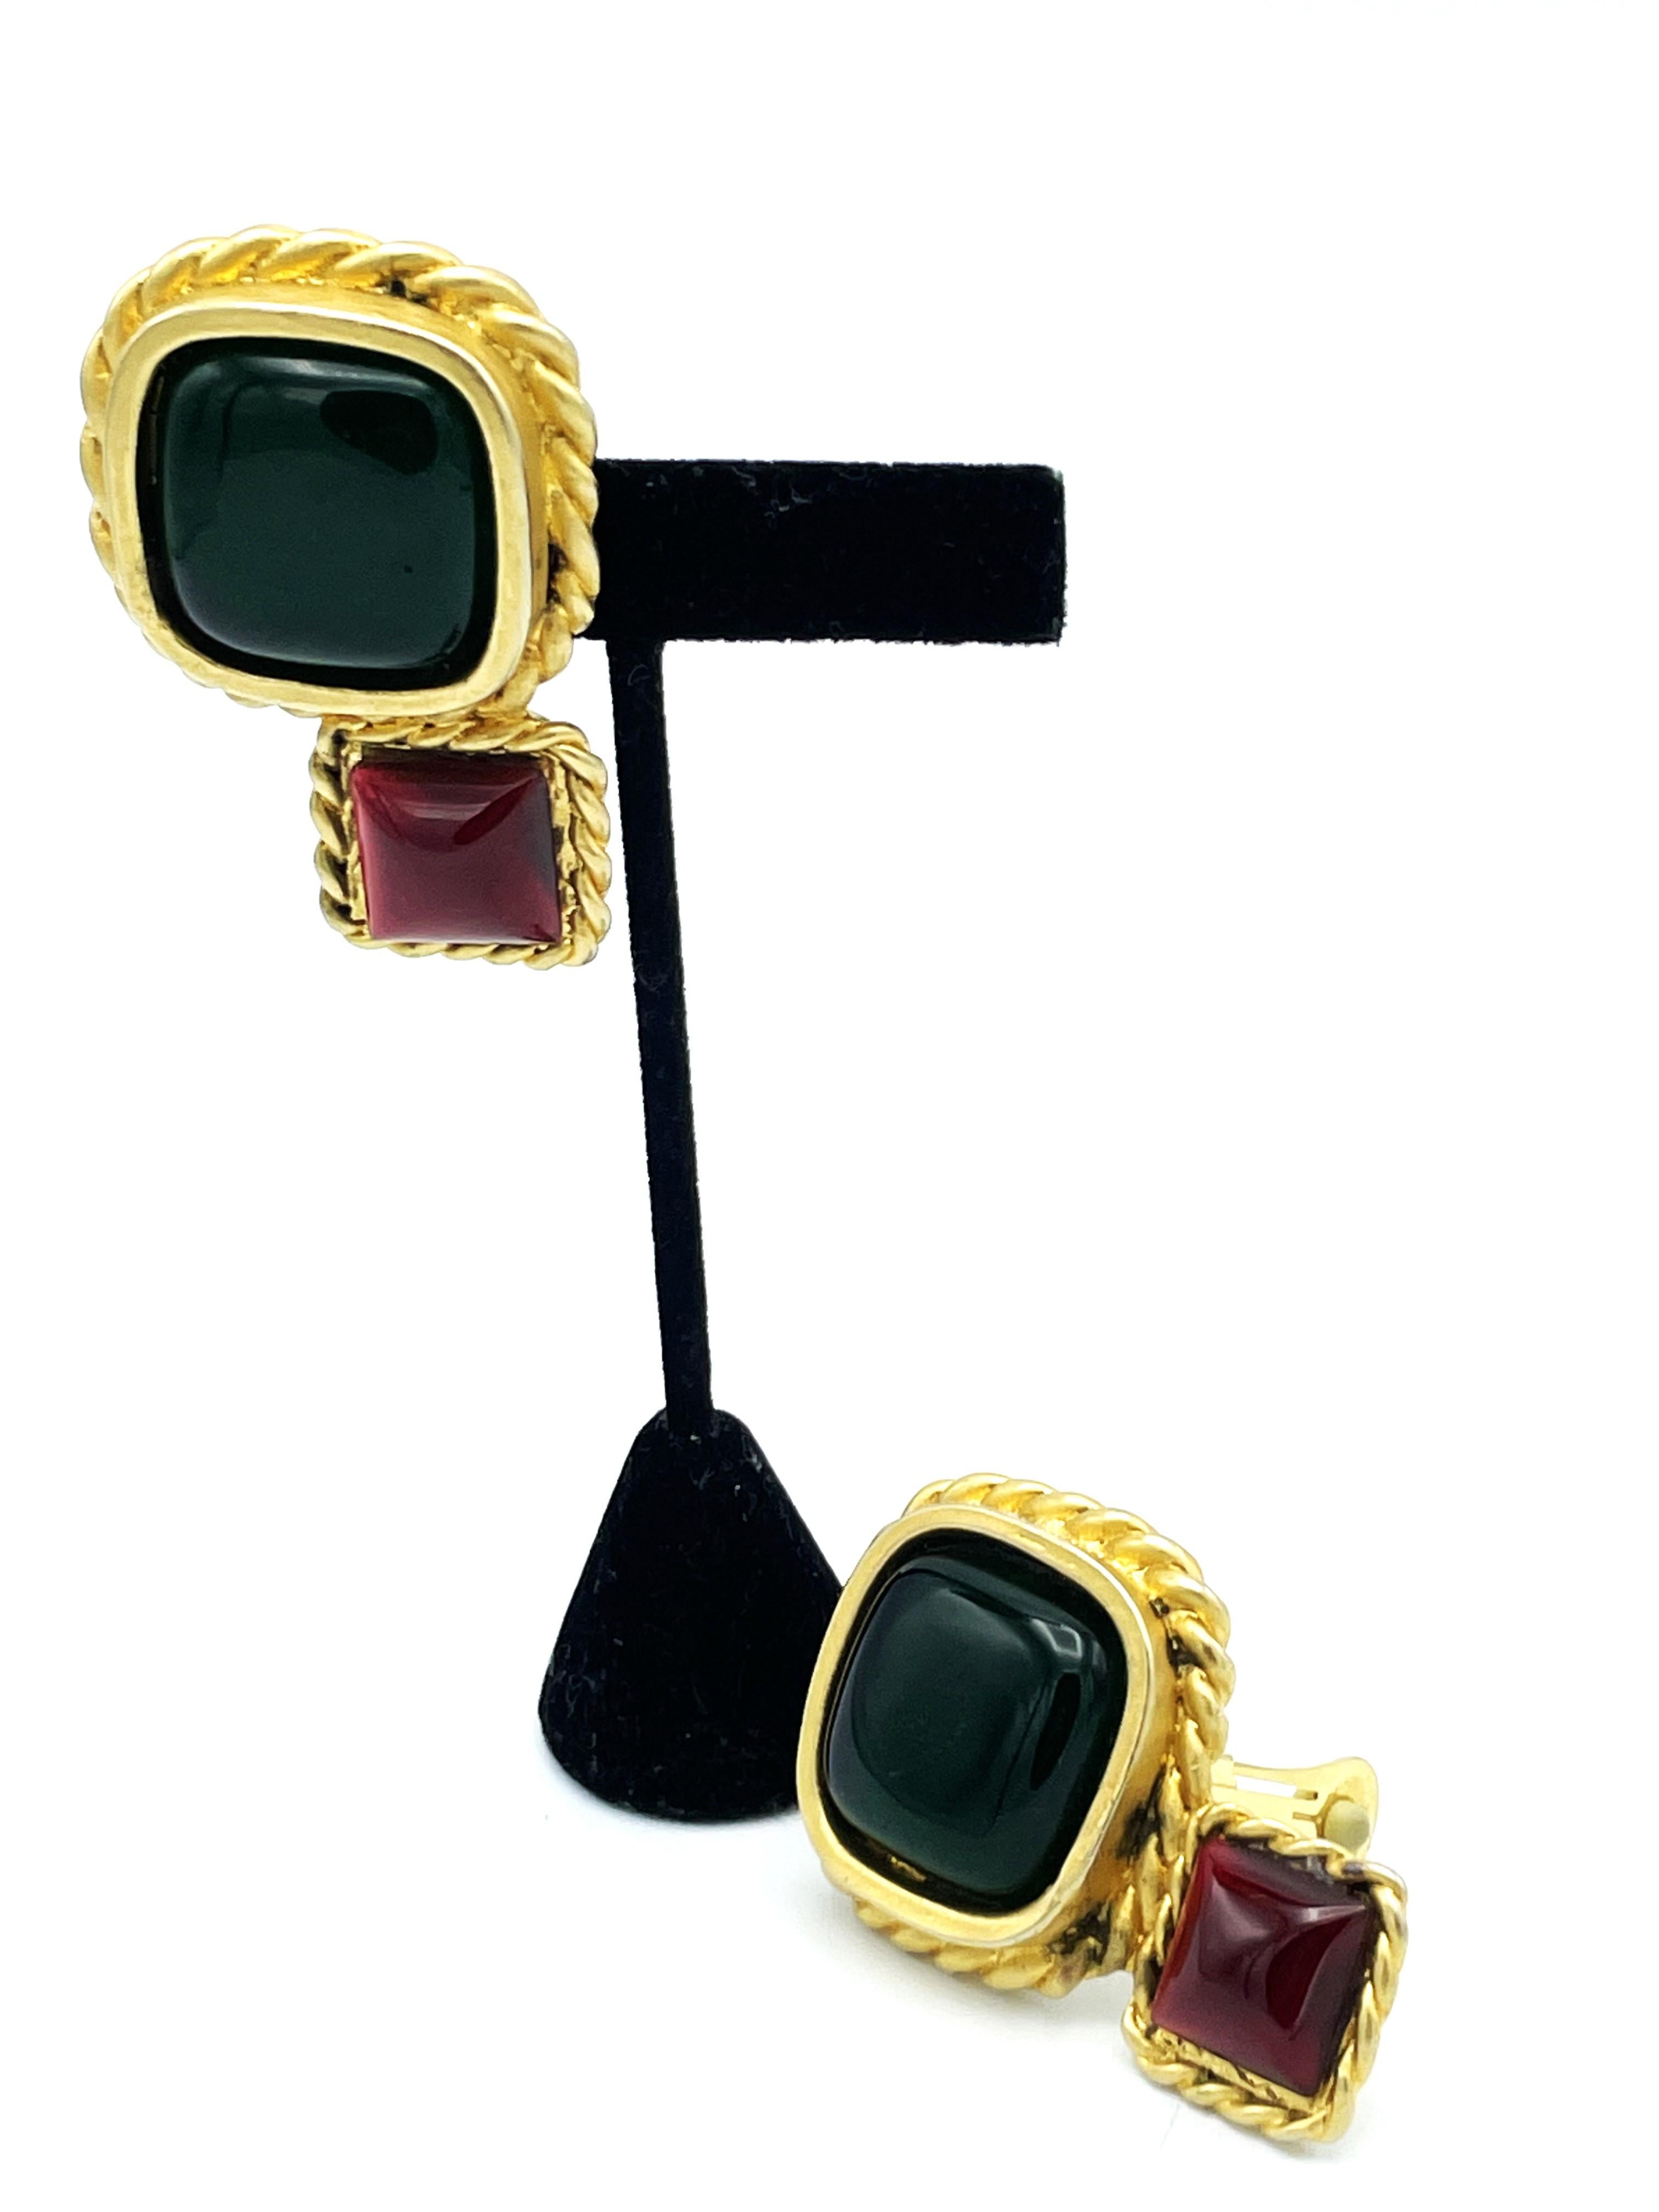 Uncut ICONIC CHANEL CLIP-ON EARRING green and red poured glass by Gripoix, Resin 1990s For Sale